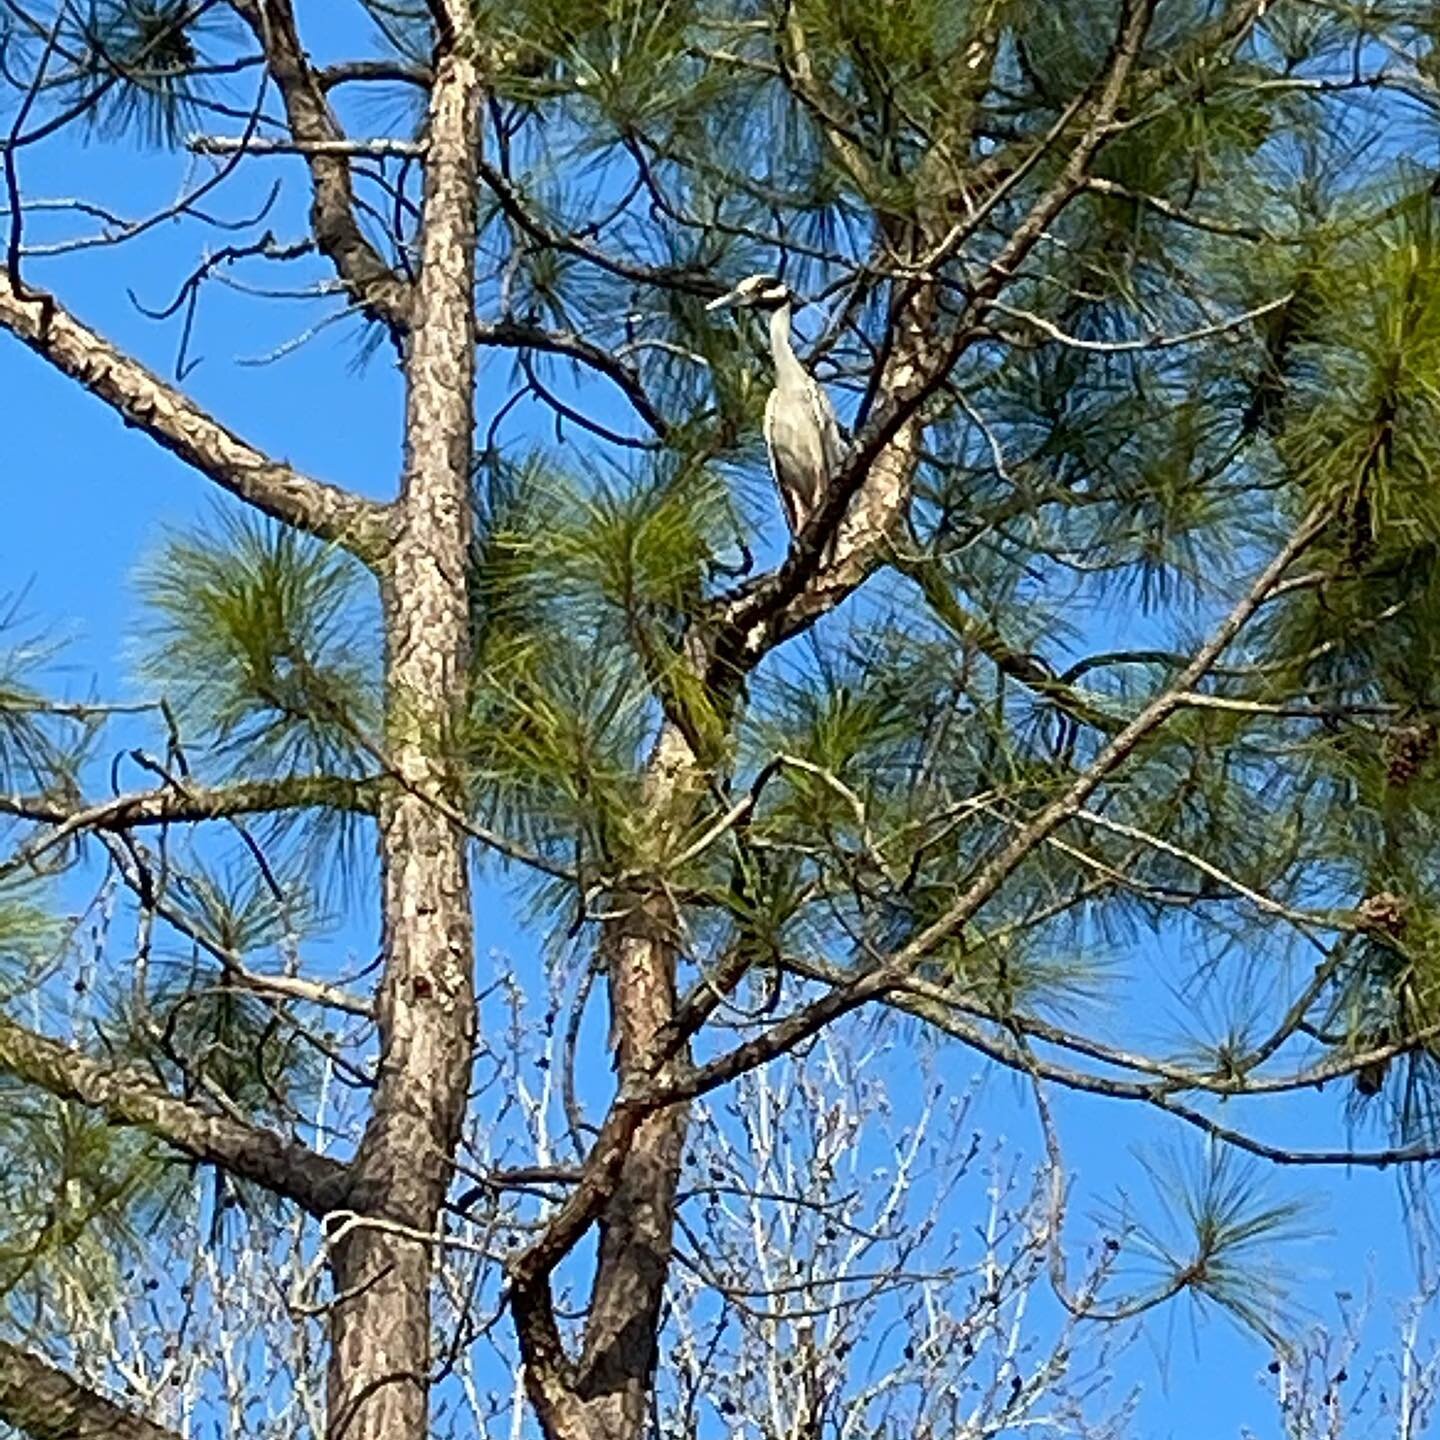 Dave and I saw this bird in the tree last Friday while showing houses. It was really interesting.